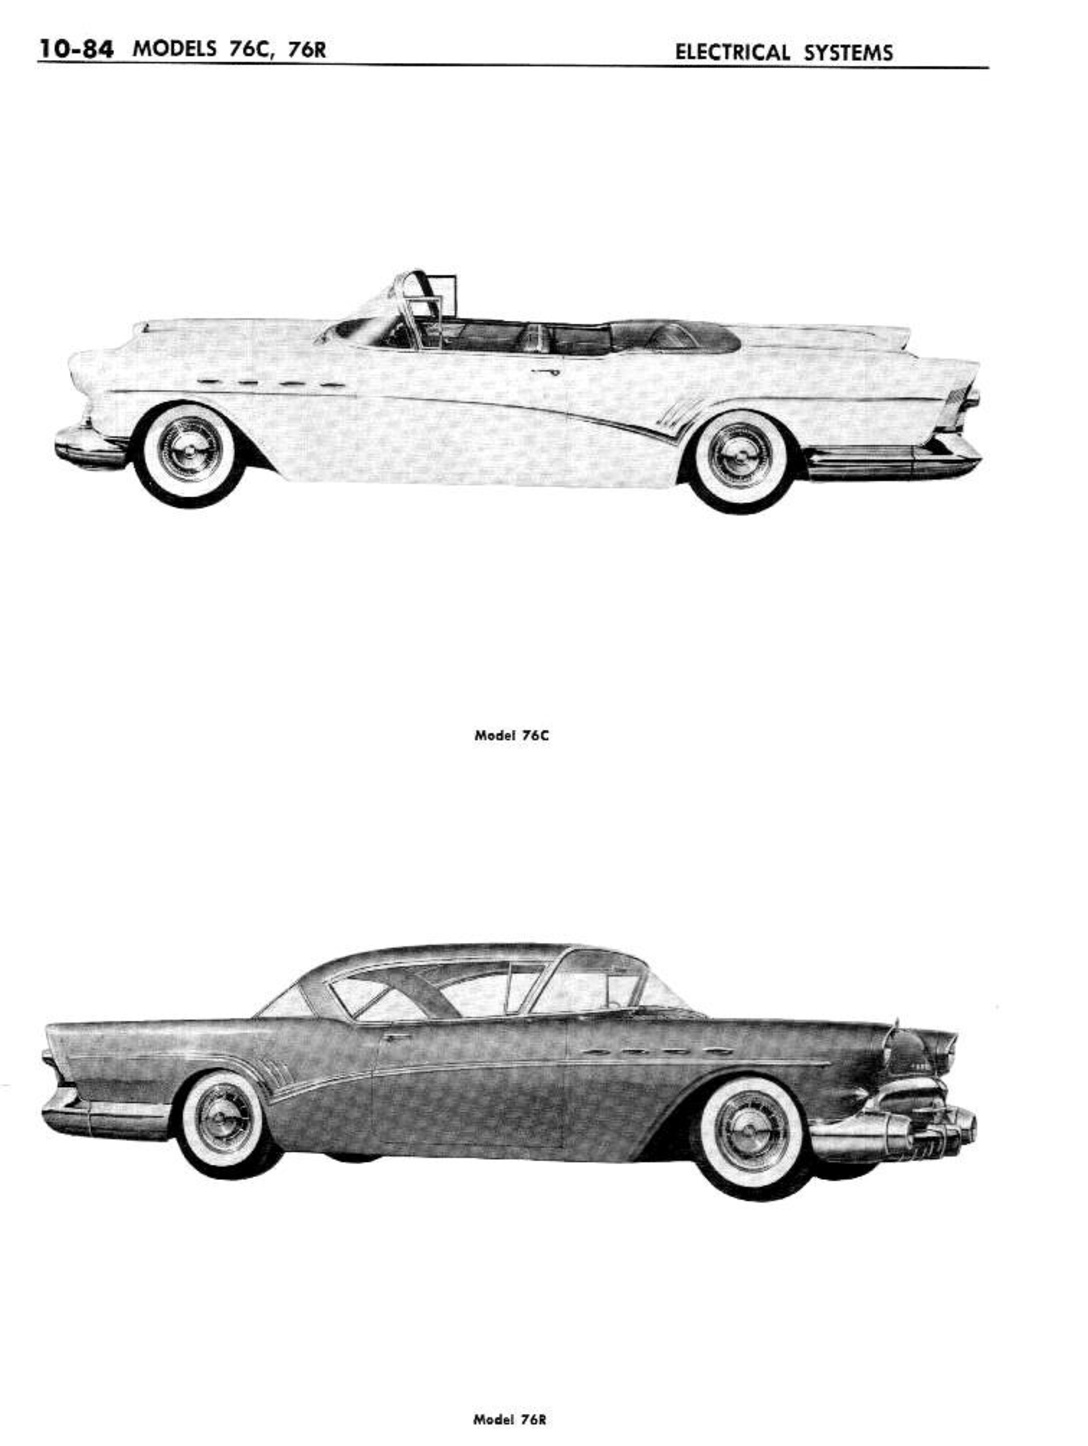 n_11 1957 Buick Shop Manual - Electrical Systems-084-084.jpg